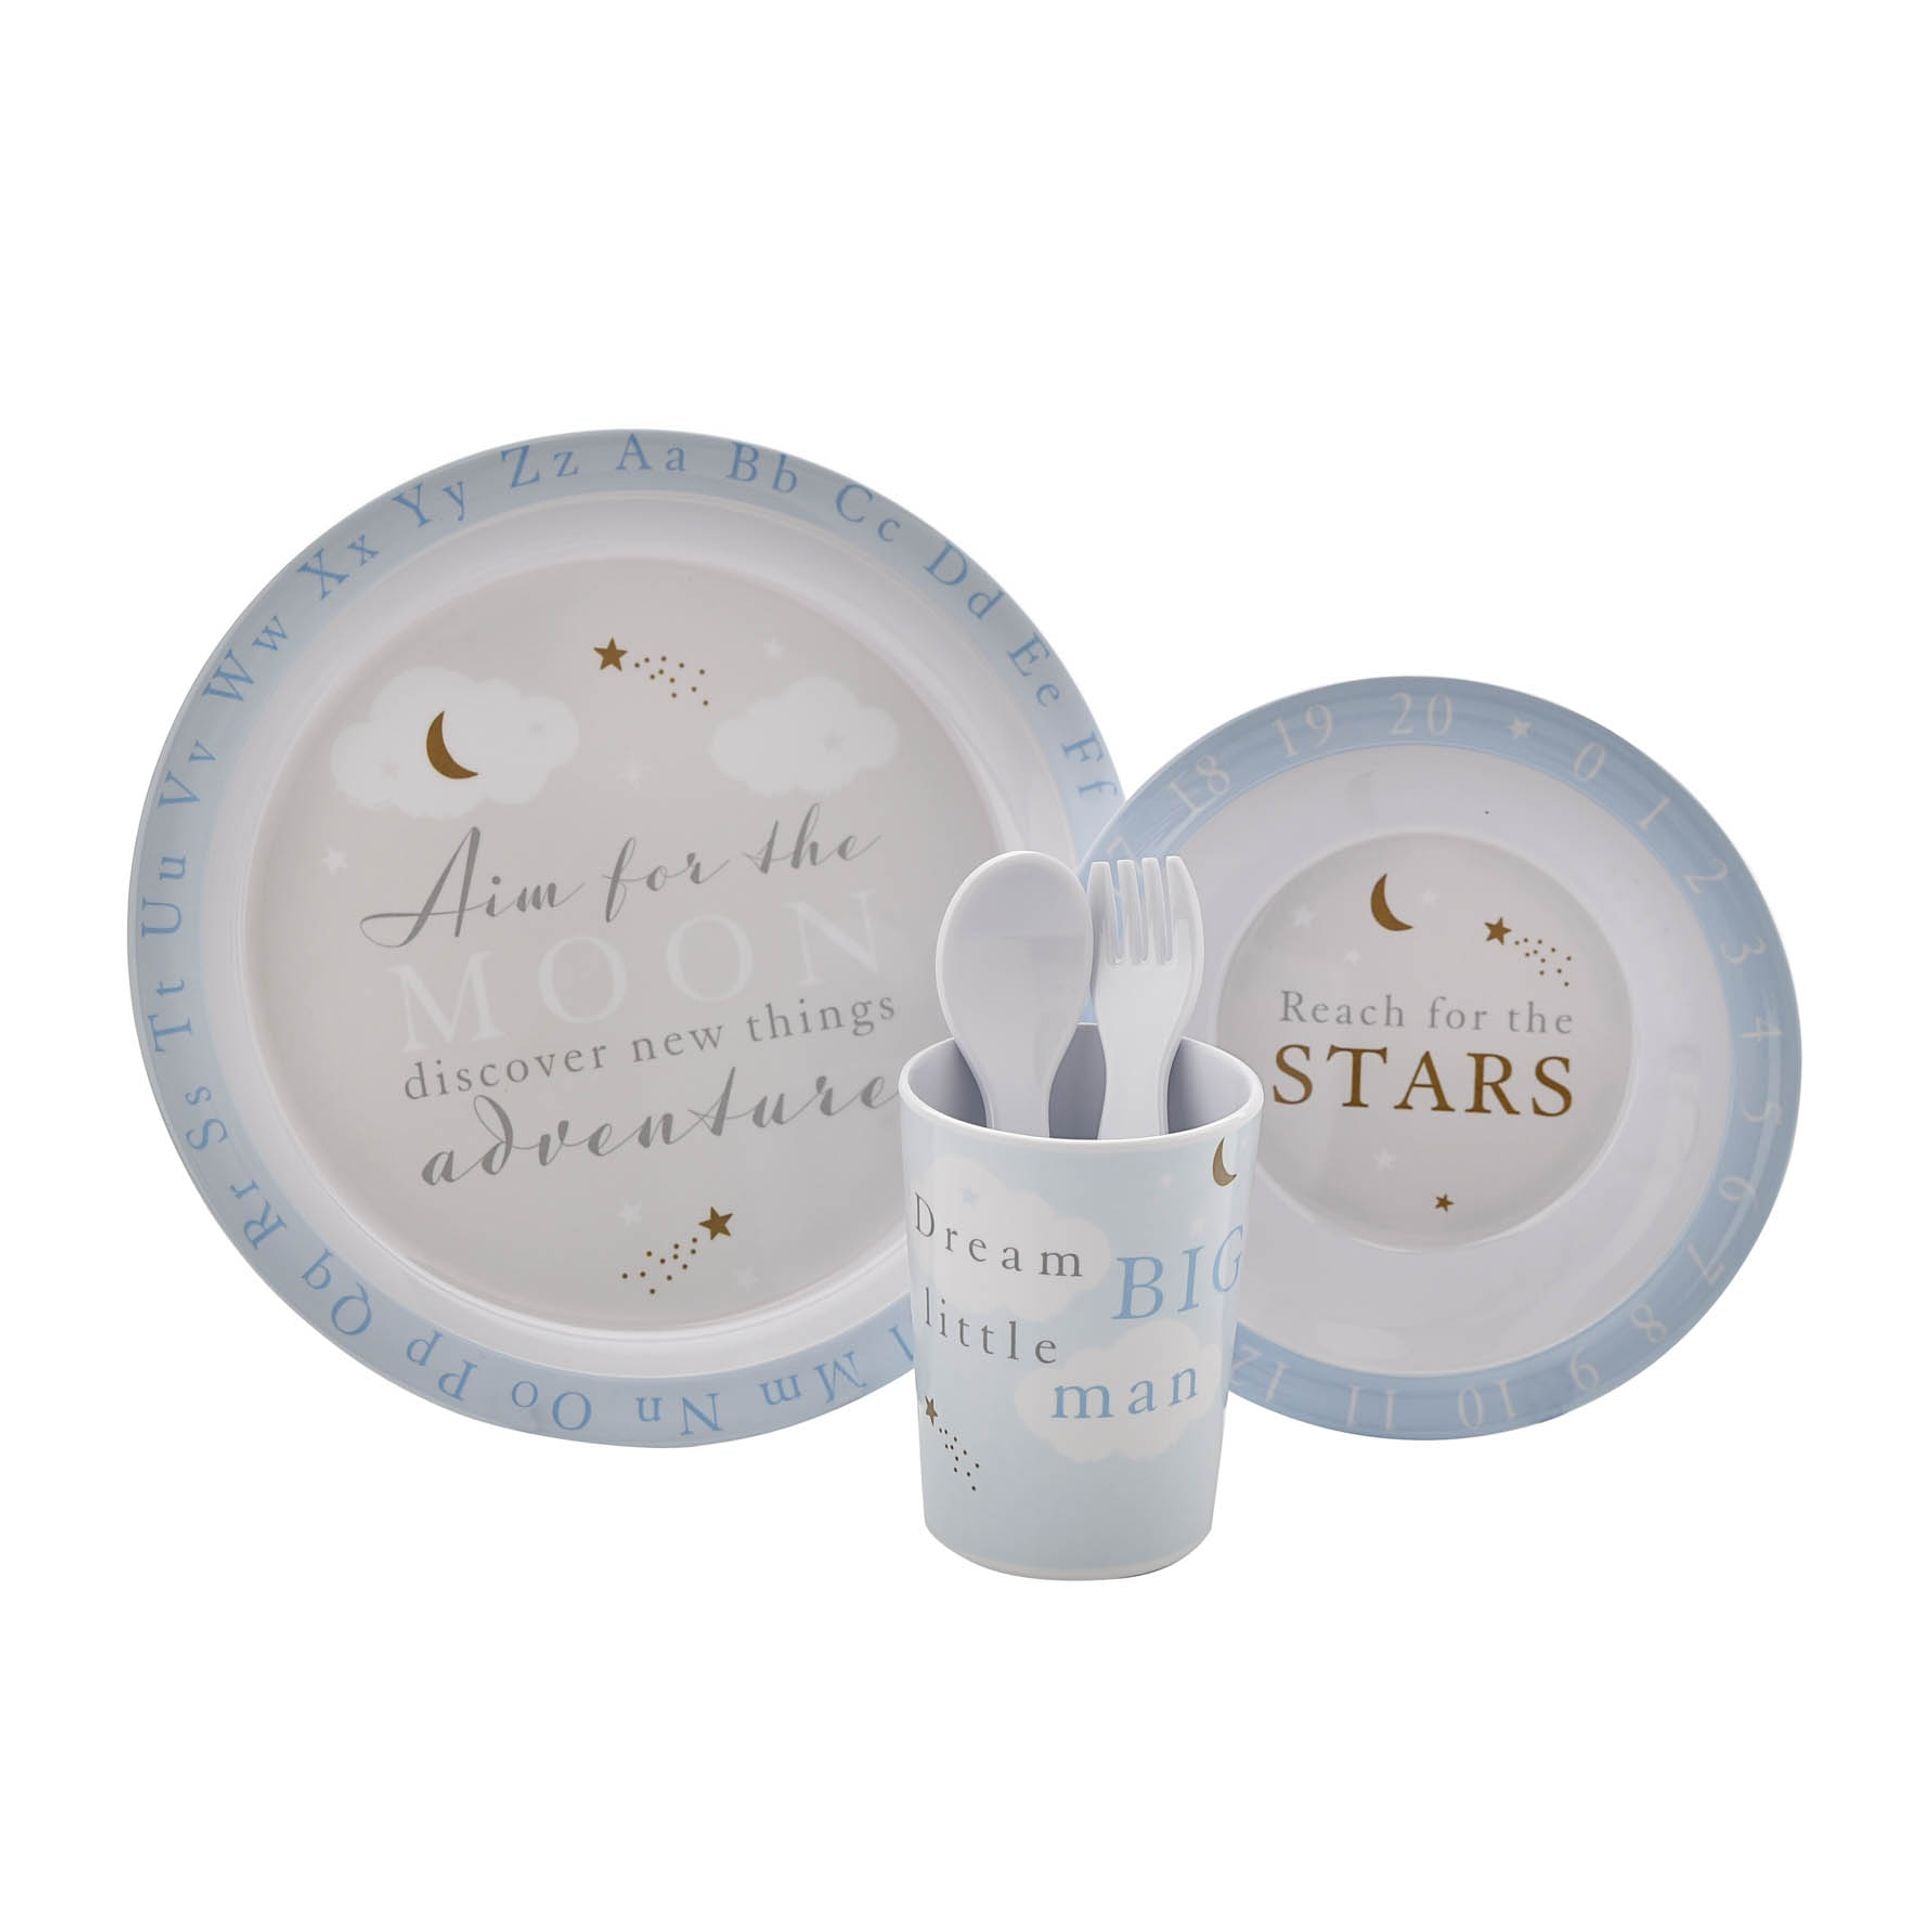 Five piece plate set with plate, bowl, beaker, fork and spoon.  Perfect gift with Aim For The Moon and Reach For The Stars wording.